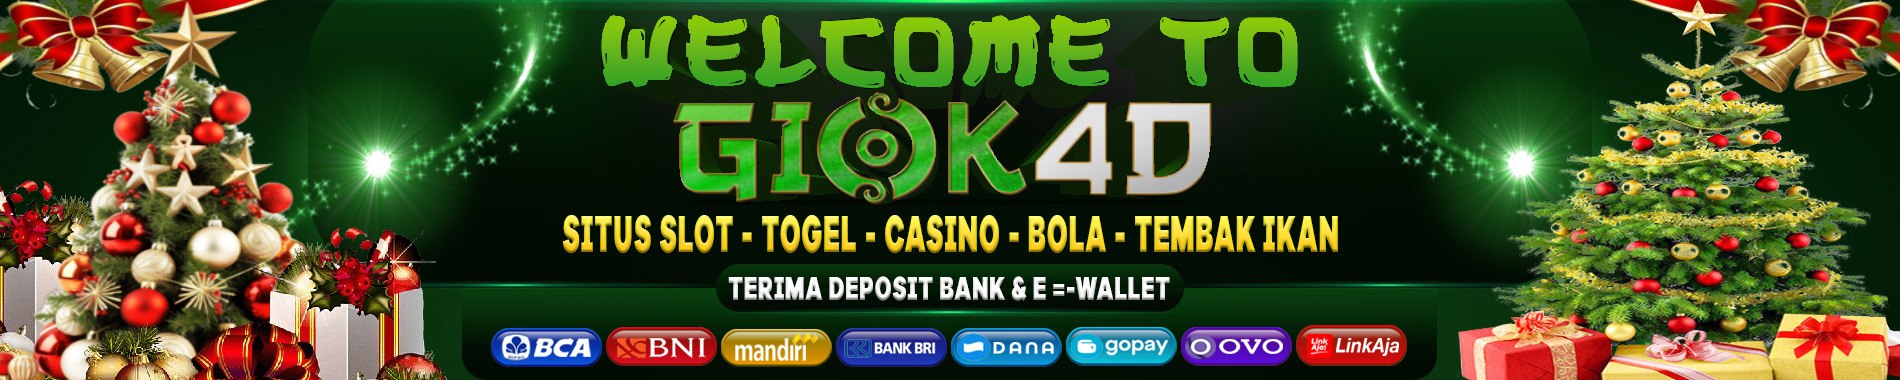 WELCOME TO GIOK4D